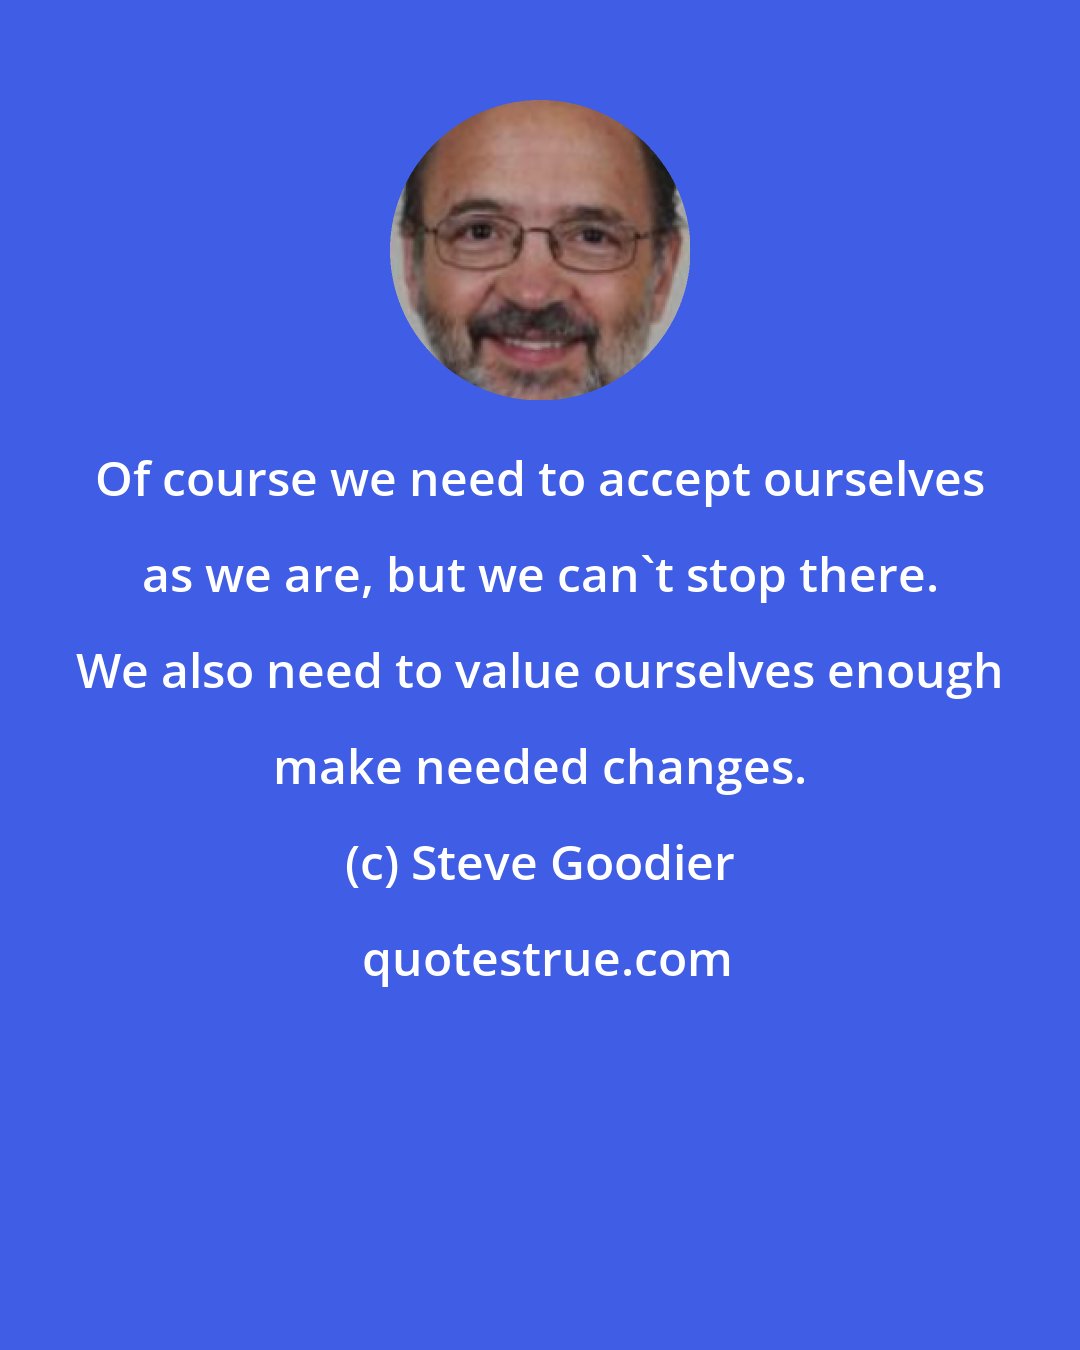 Steve Goodier: Of course we need to accept ourselves as we are, but we can't stop there. We also need to value ourselves enough make needed changes.